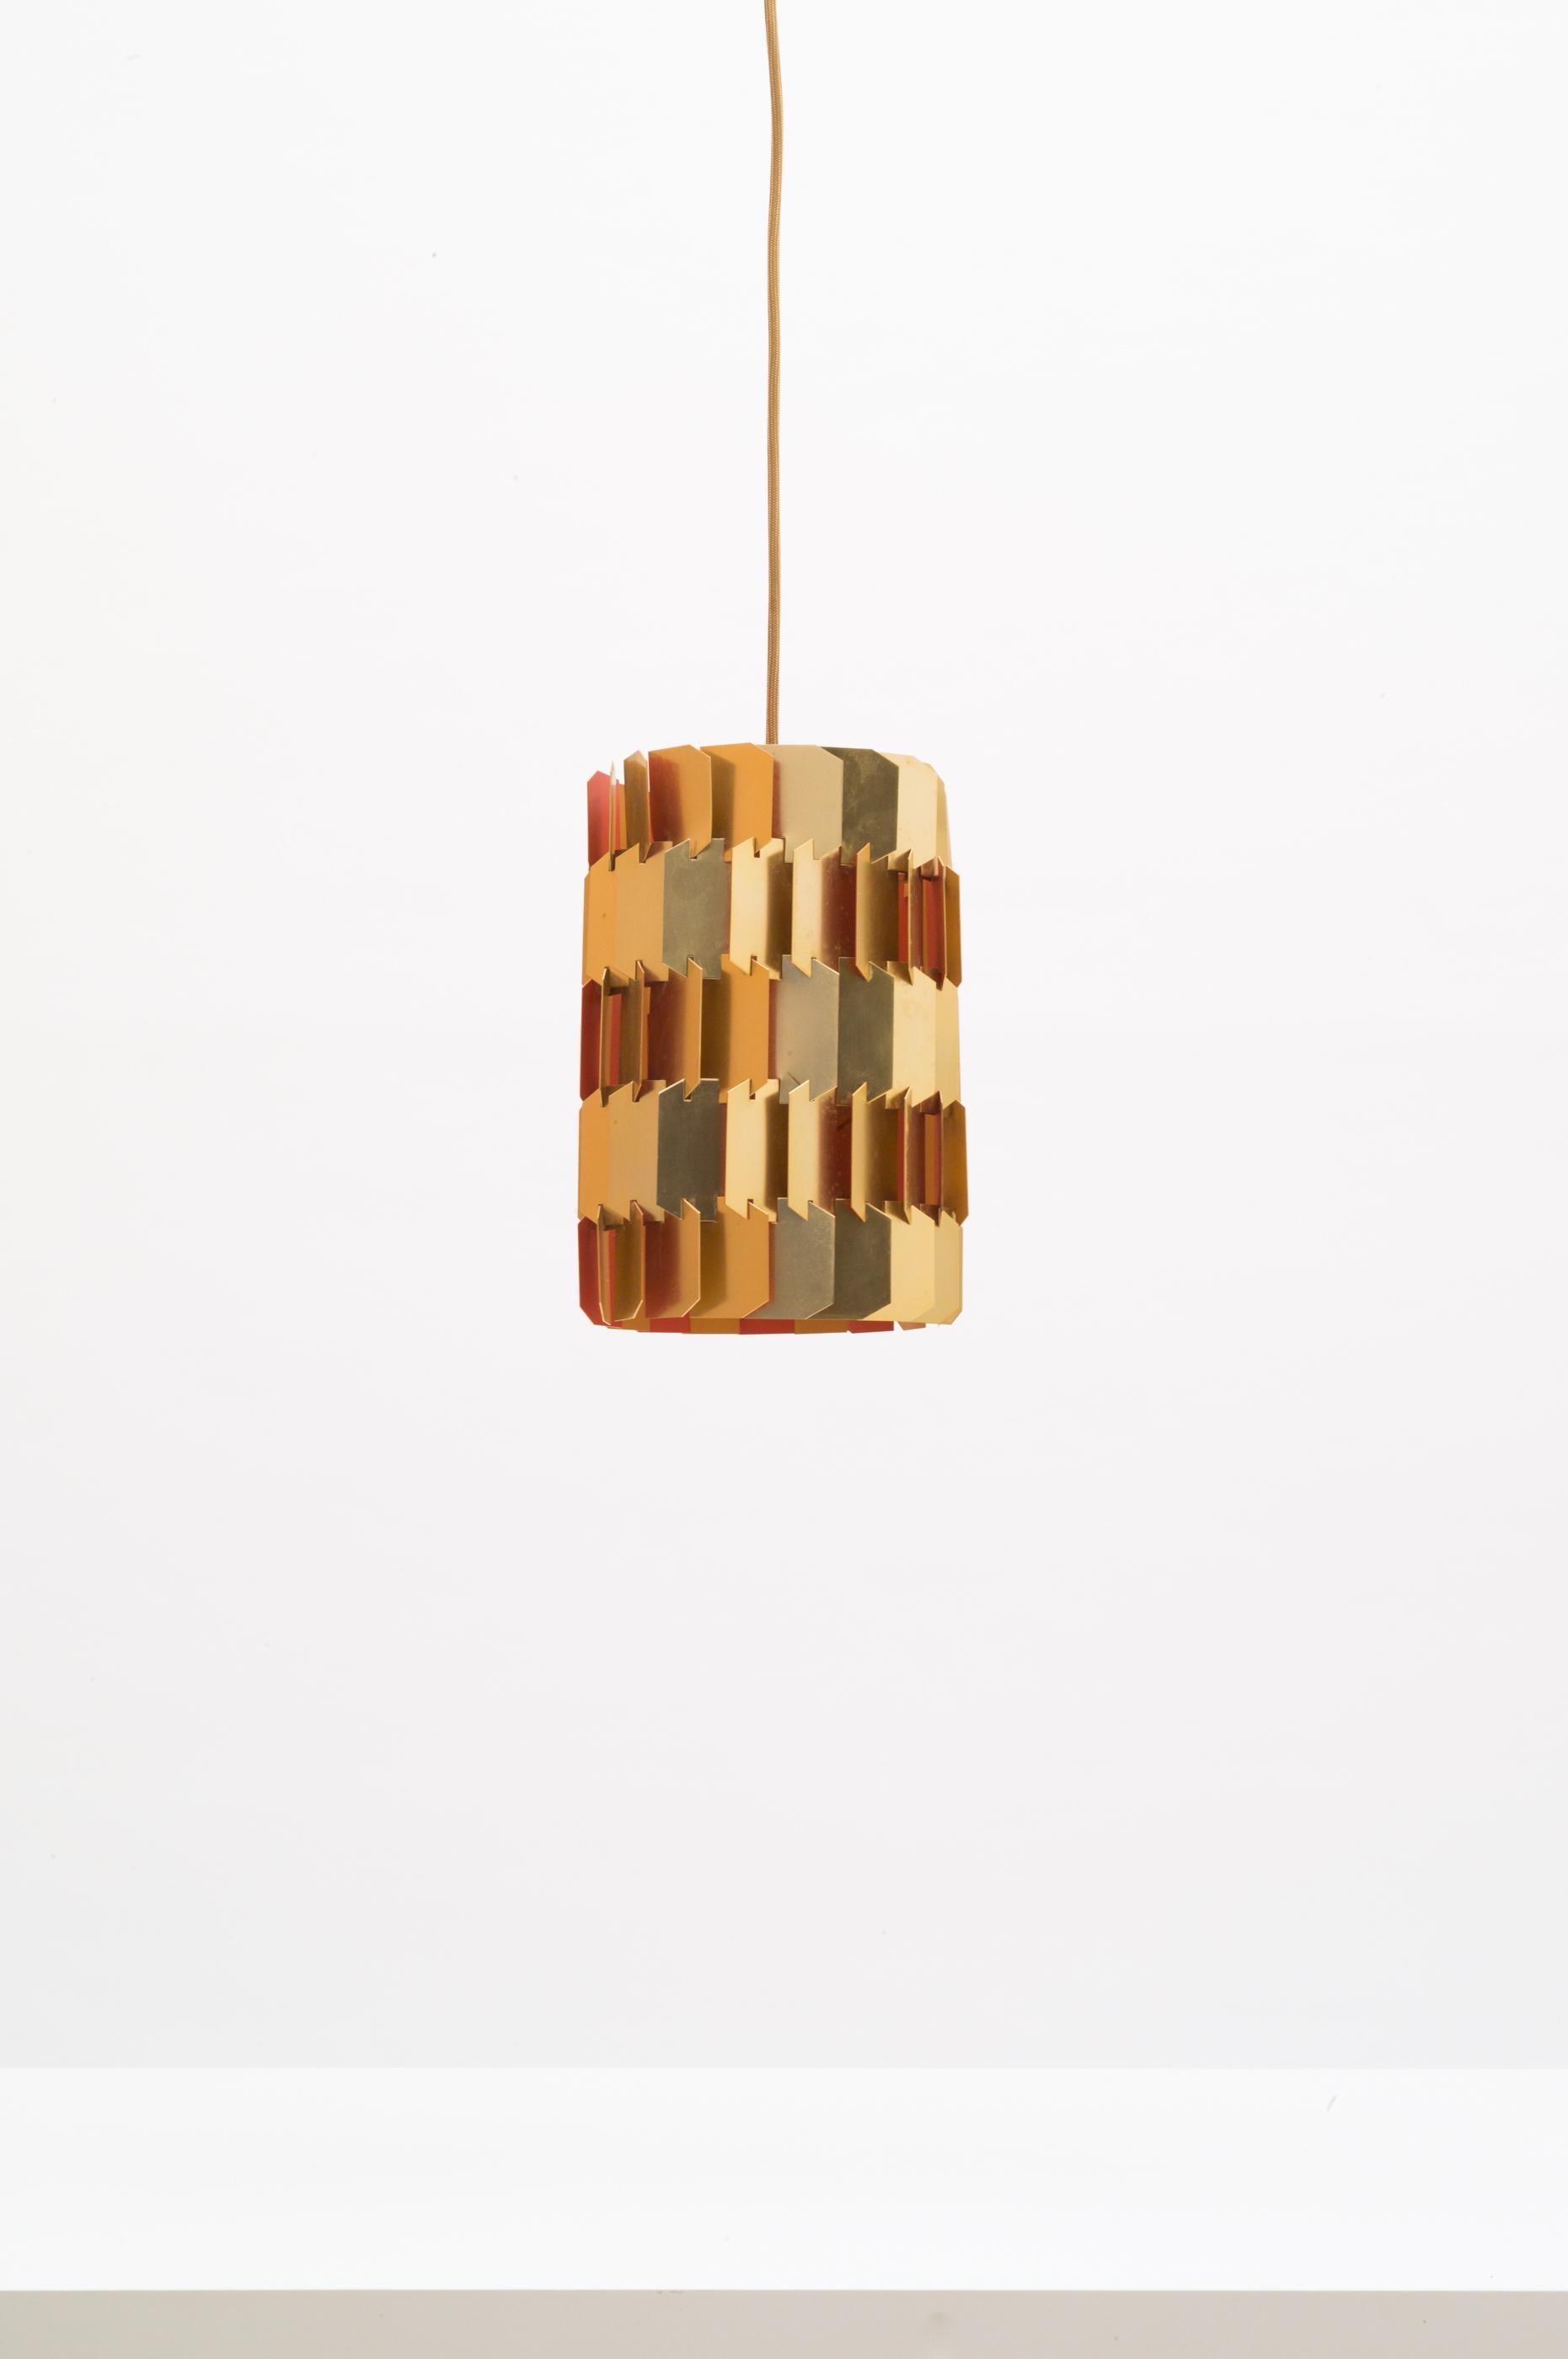 Pendant light designed by Louis Weisdorf for LYFA, Denmark 1960s. Made out of brass plated aluminium slates, two shades of orange on the inside for a warm cozy light. Comes with new gold colored textile cable.